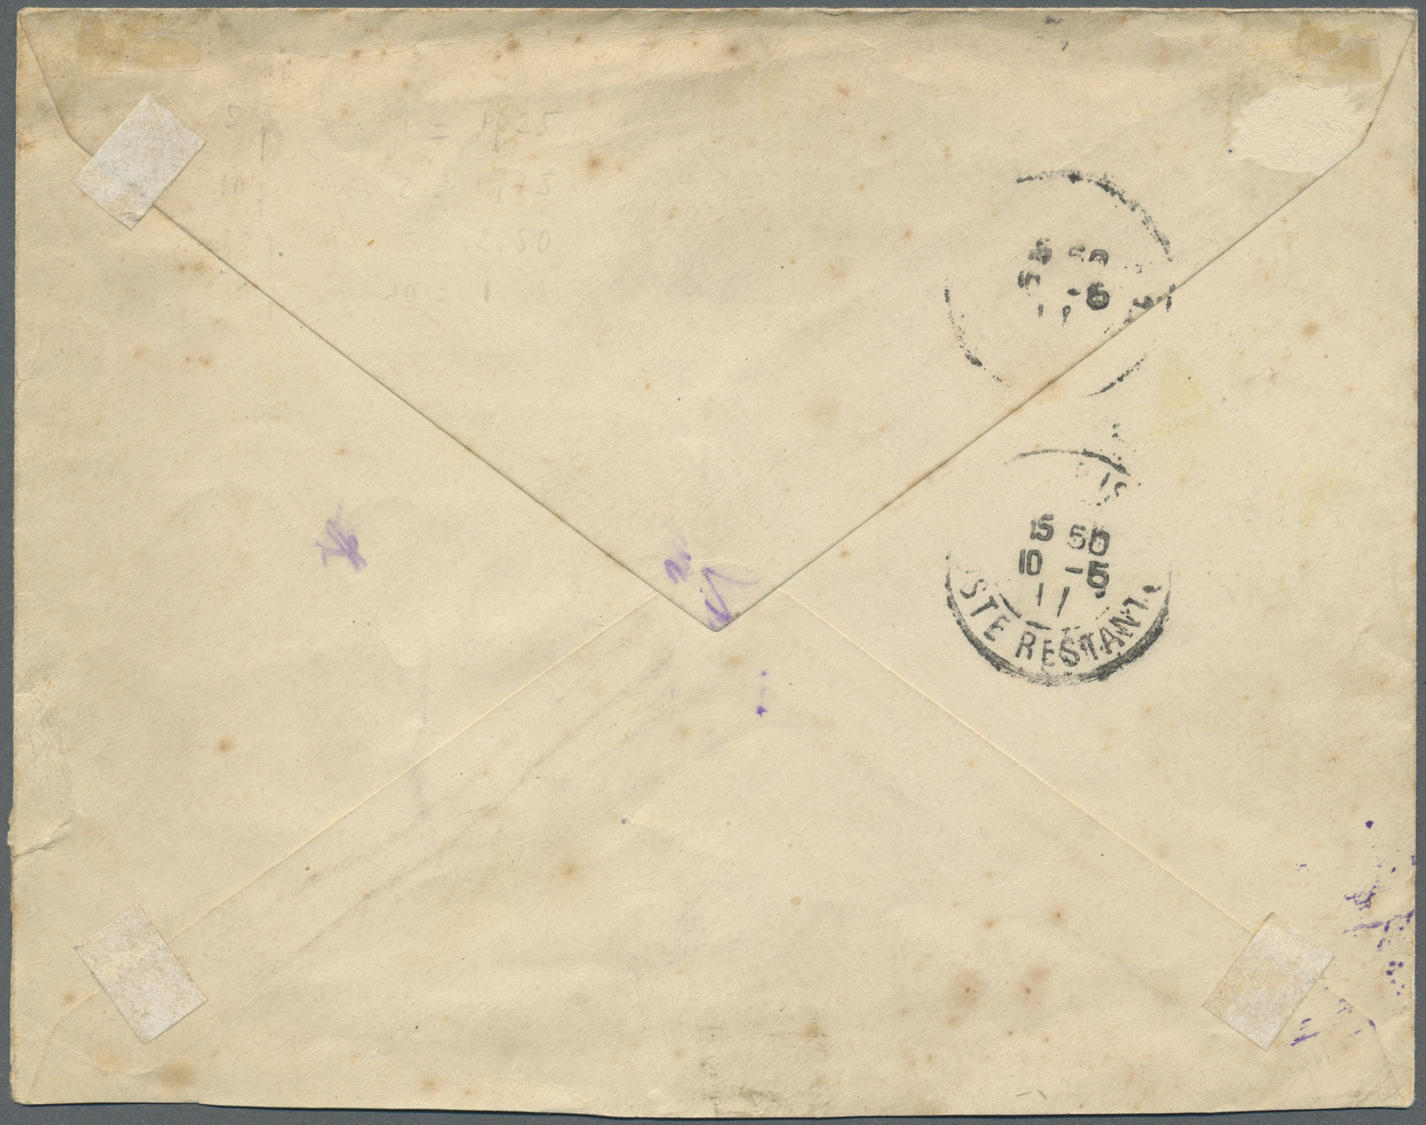 Br Russische Post In Der Levante - Staatspost: 1911. Envelope (small Faults,stains) To Paris Bearing Yvert 30, 20 - Turkish Empire